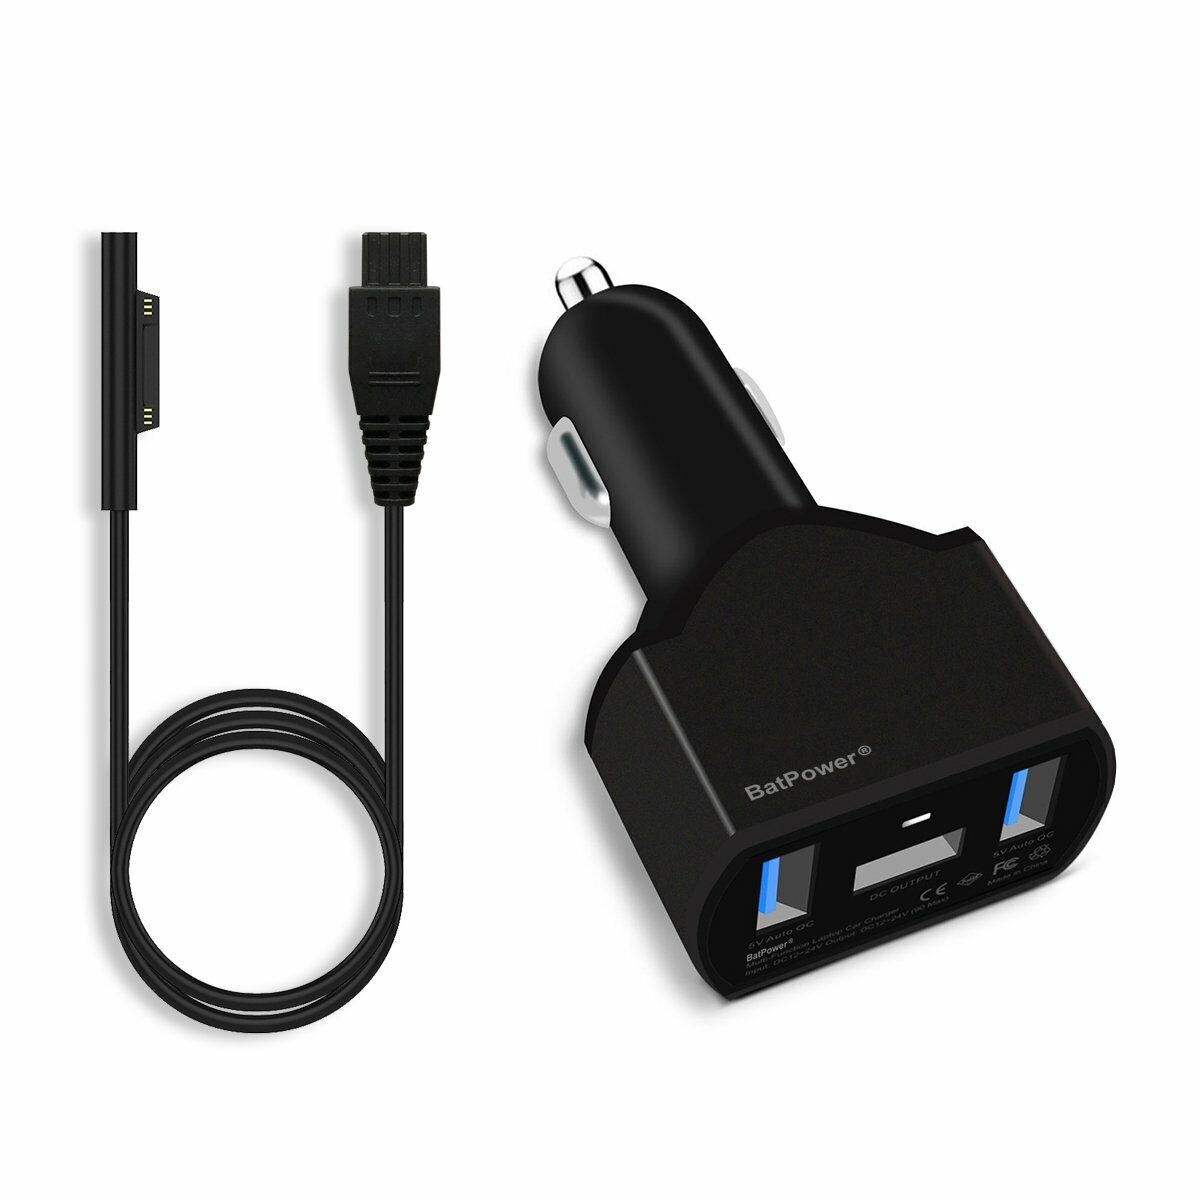 BatPower 110W 102W Surface Book 2 Laptop Car Charger Microsoft Car Power Adapter